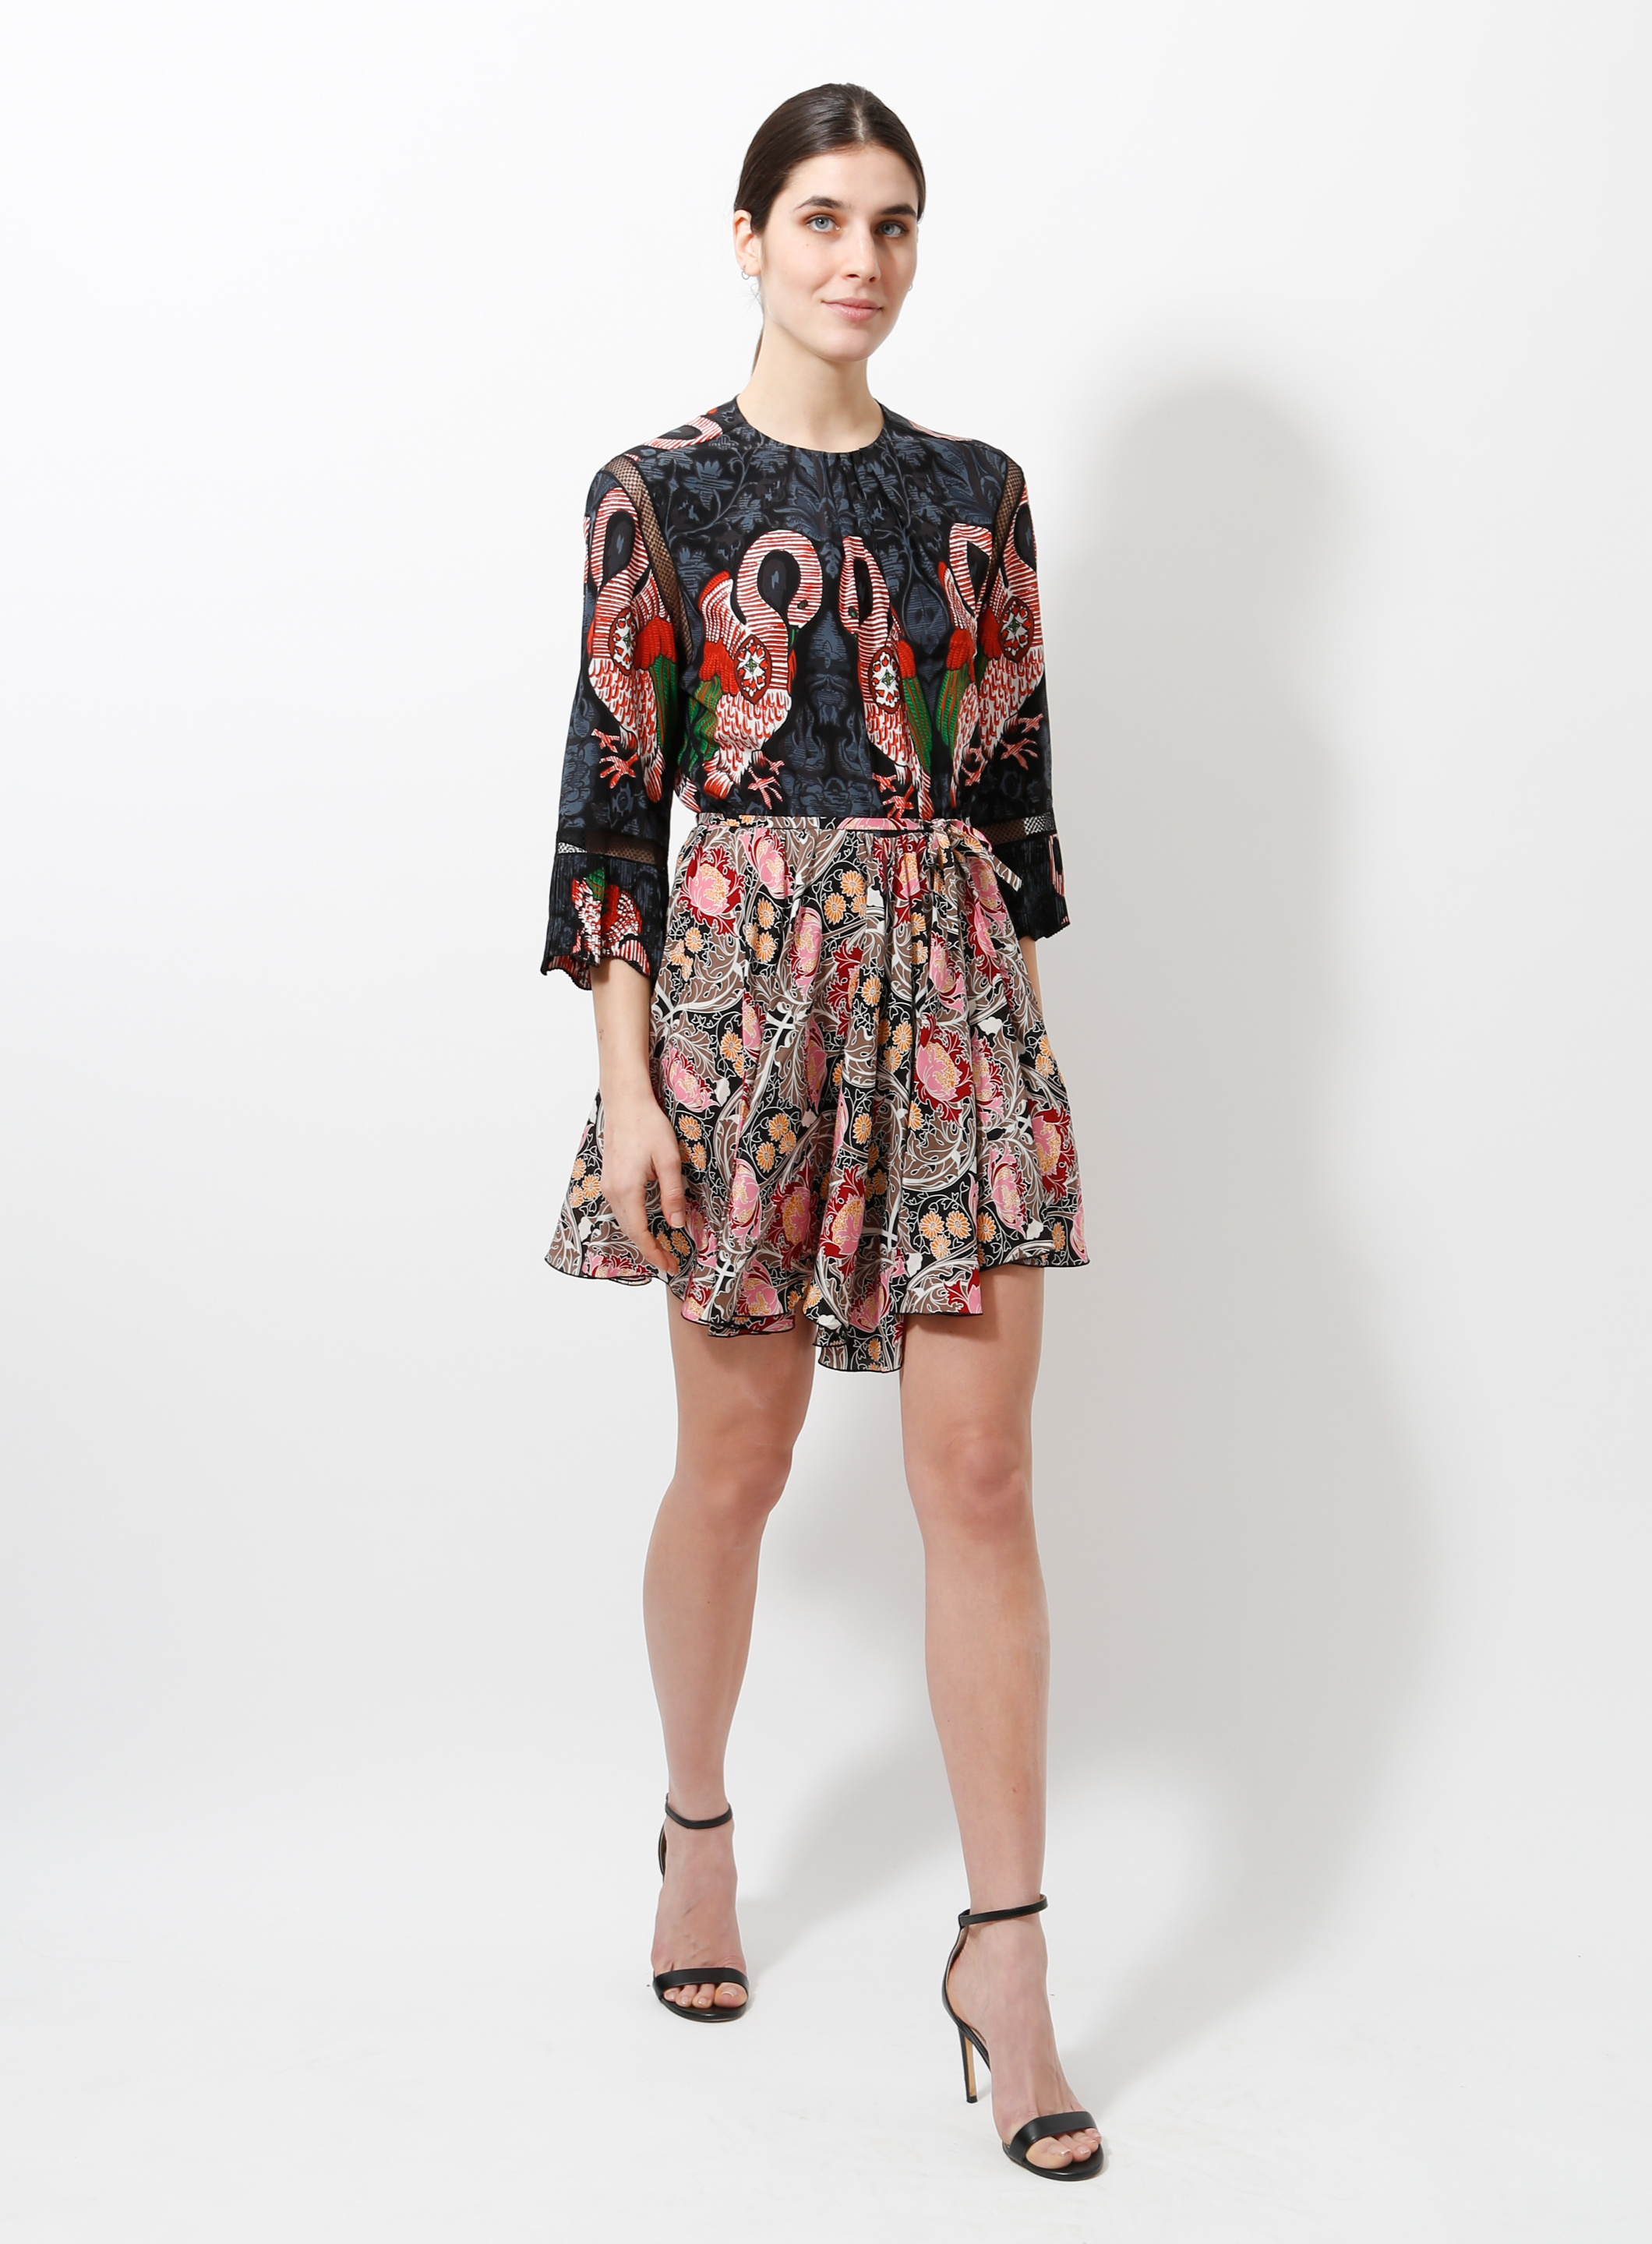 Spring 2015 Abstract Floral Dress, Authentic & Vintage